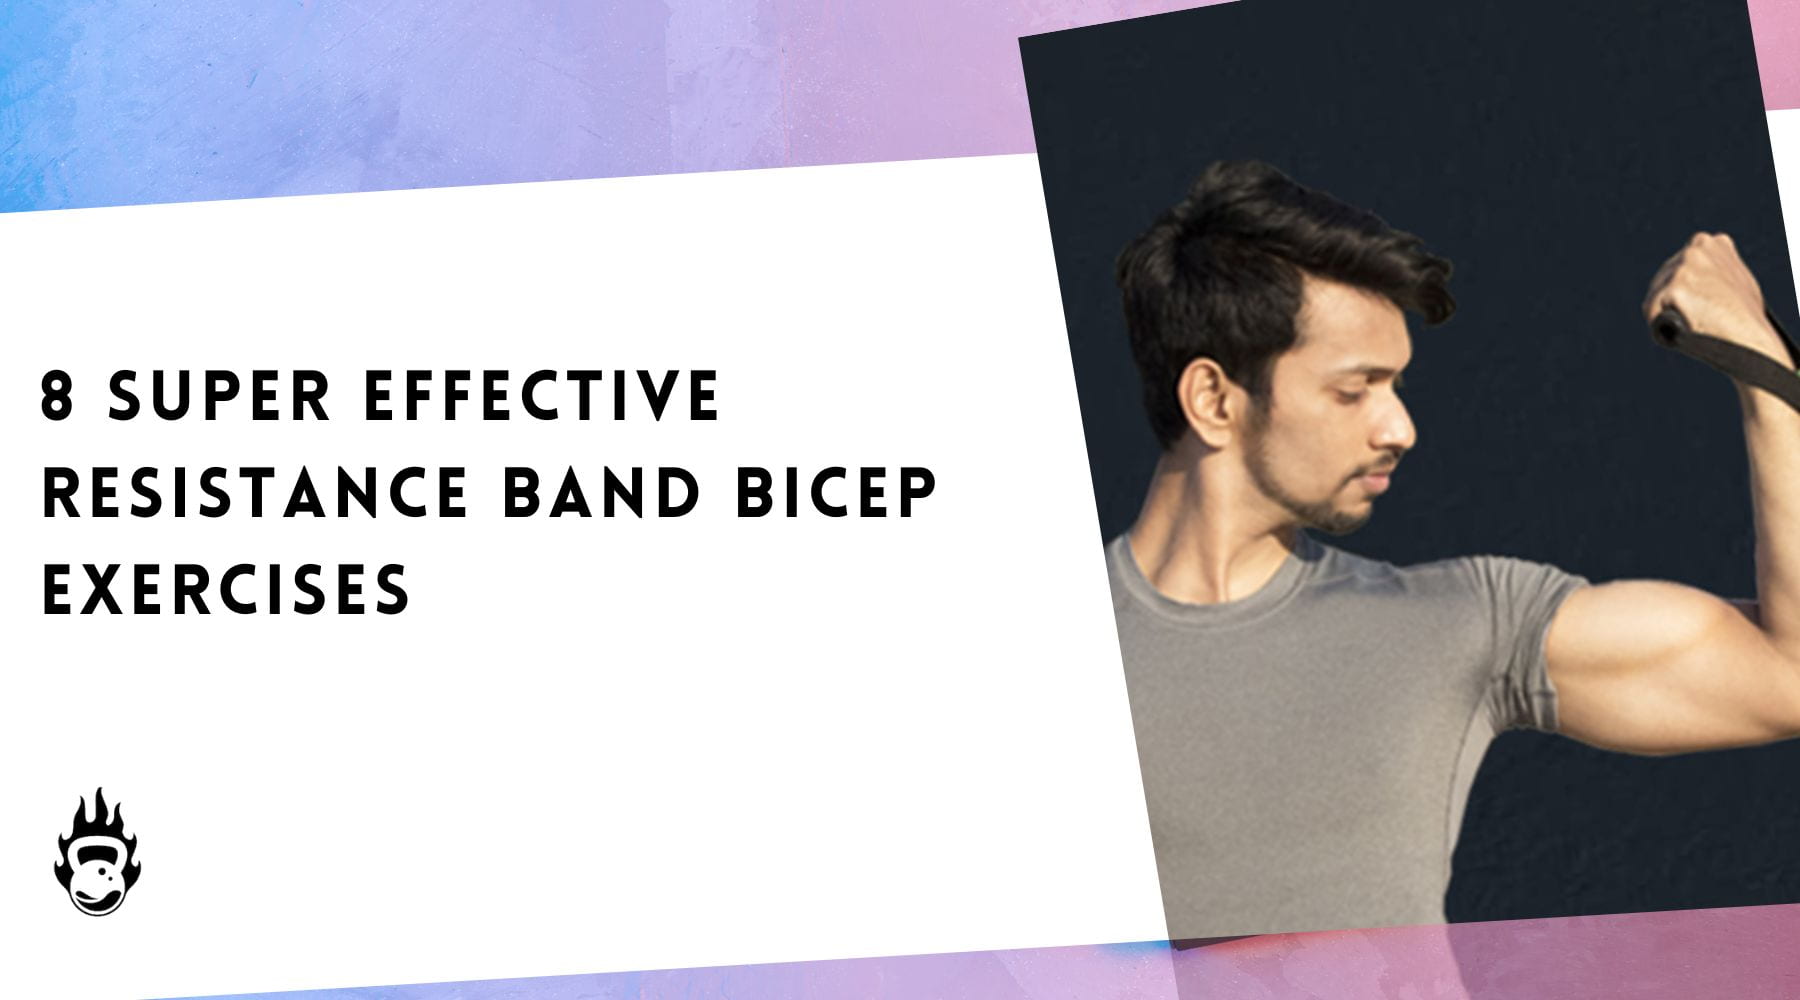 8 Super Effective Resistance Band Bicep Exercises